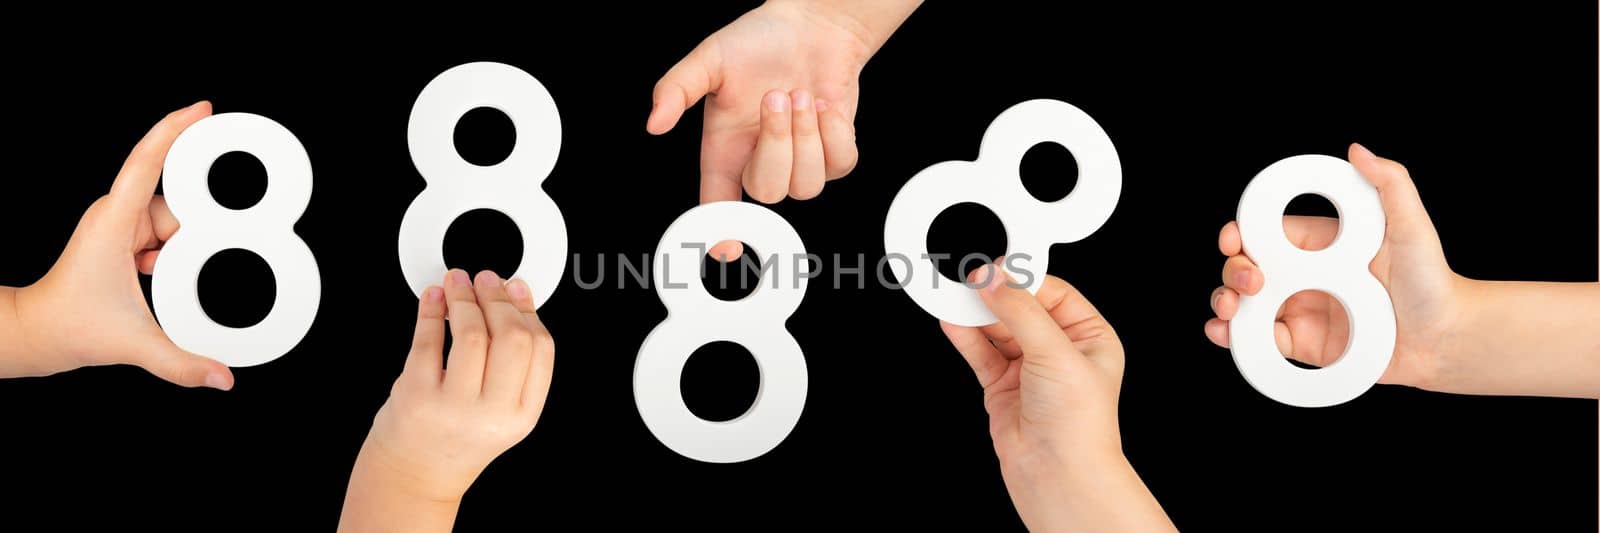 Number eight in hand isolated on black background. Number 8 in a child's hand is held on a black background. A large set of hands with the number eight to insert into a project or design.